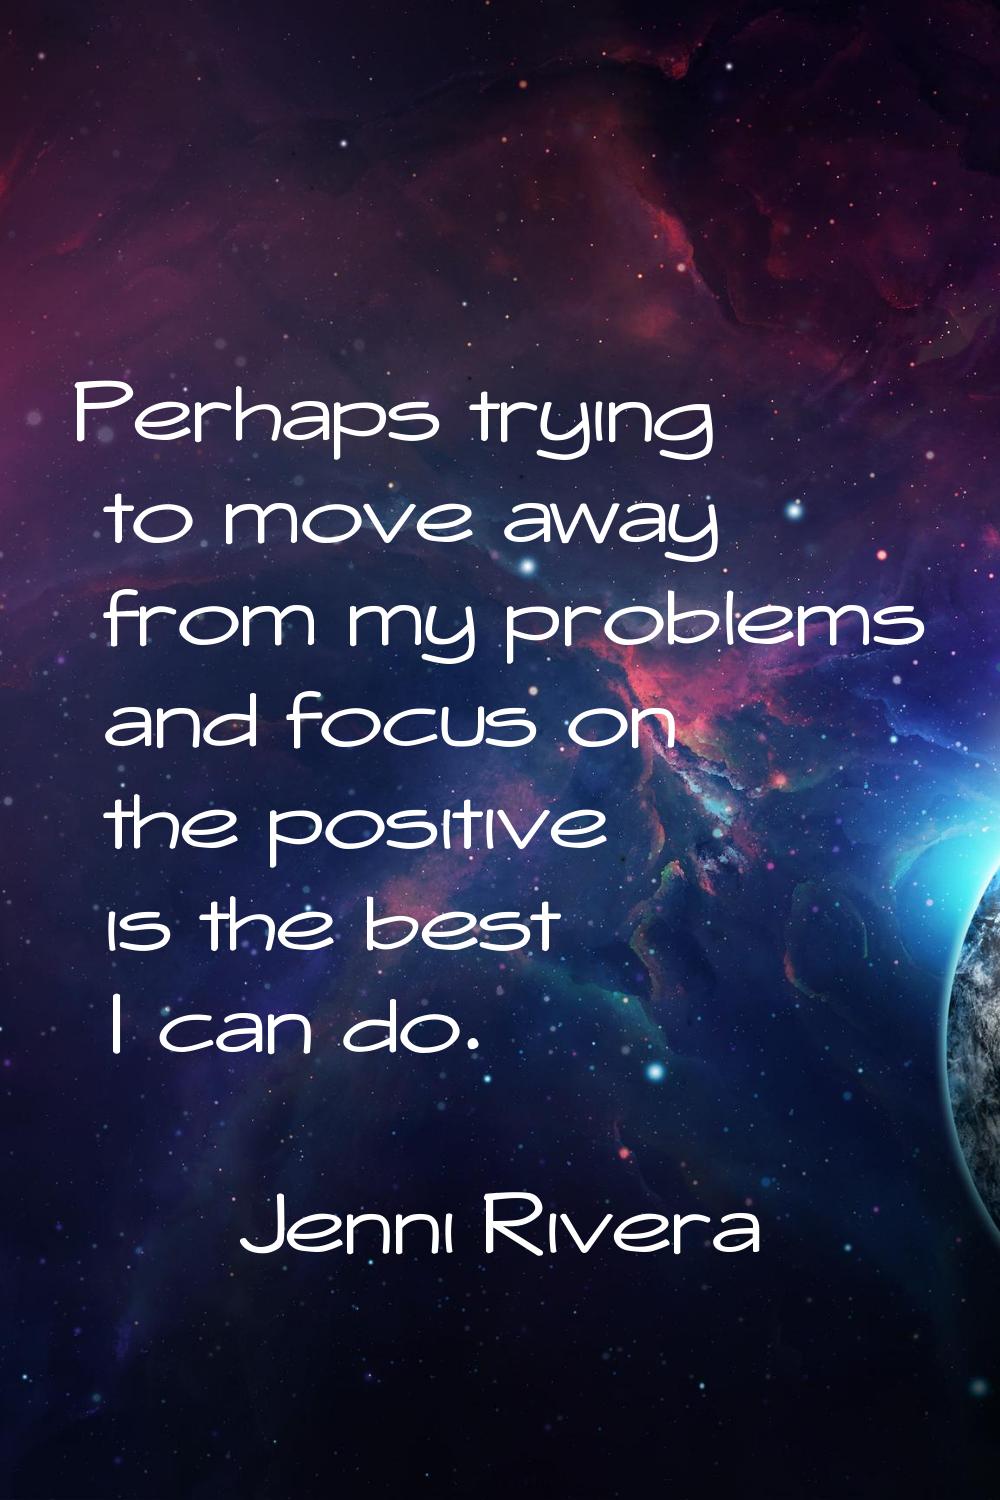 Perhaps trying to move away from my problems and focus on the positive is the best I can do.